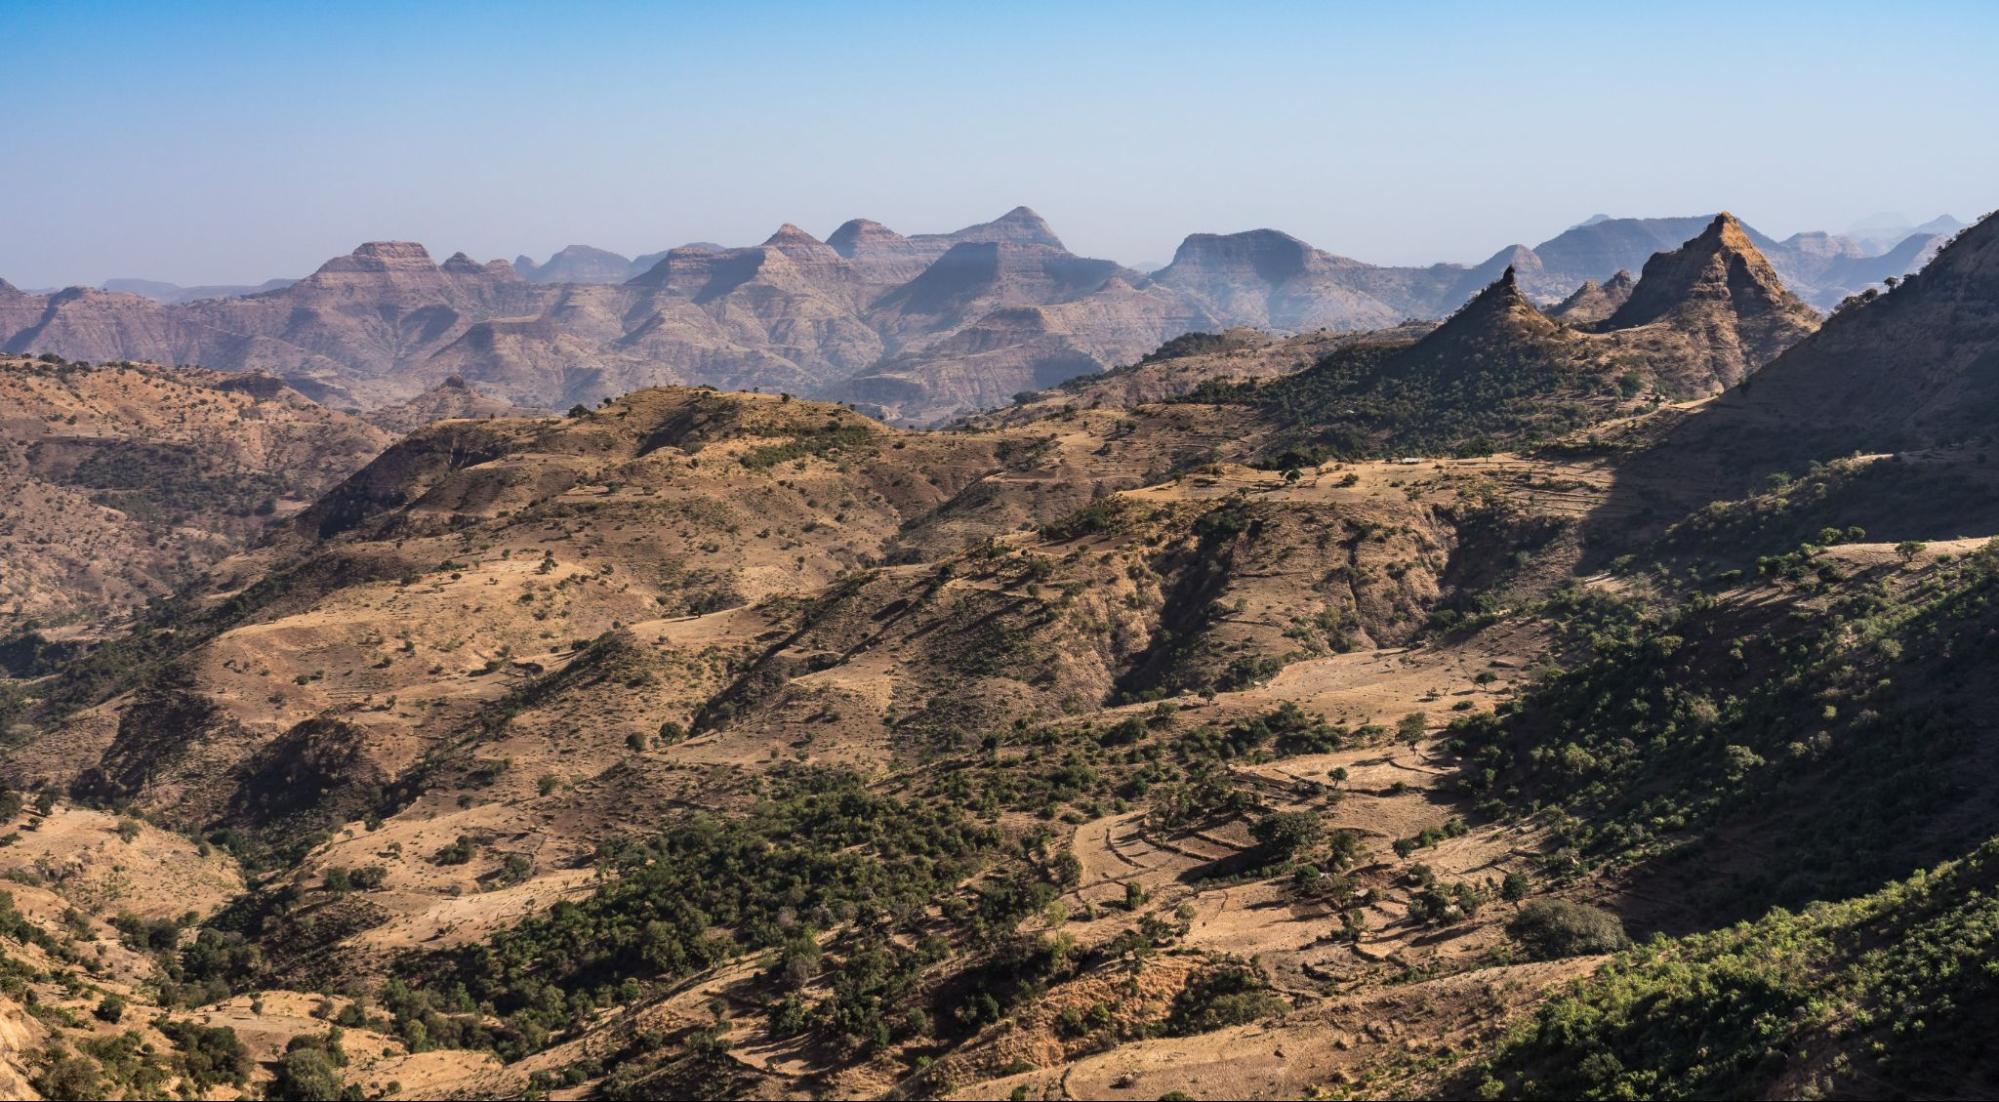 Landscape view of the Simien Mountains National Park in Northern Ethiopia on the way to Axum, Africa